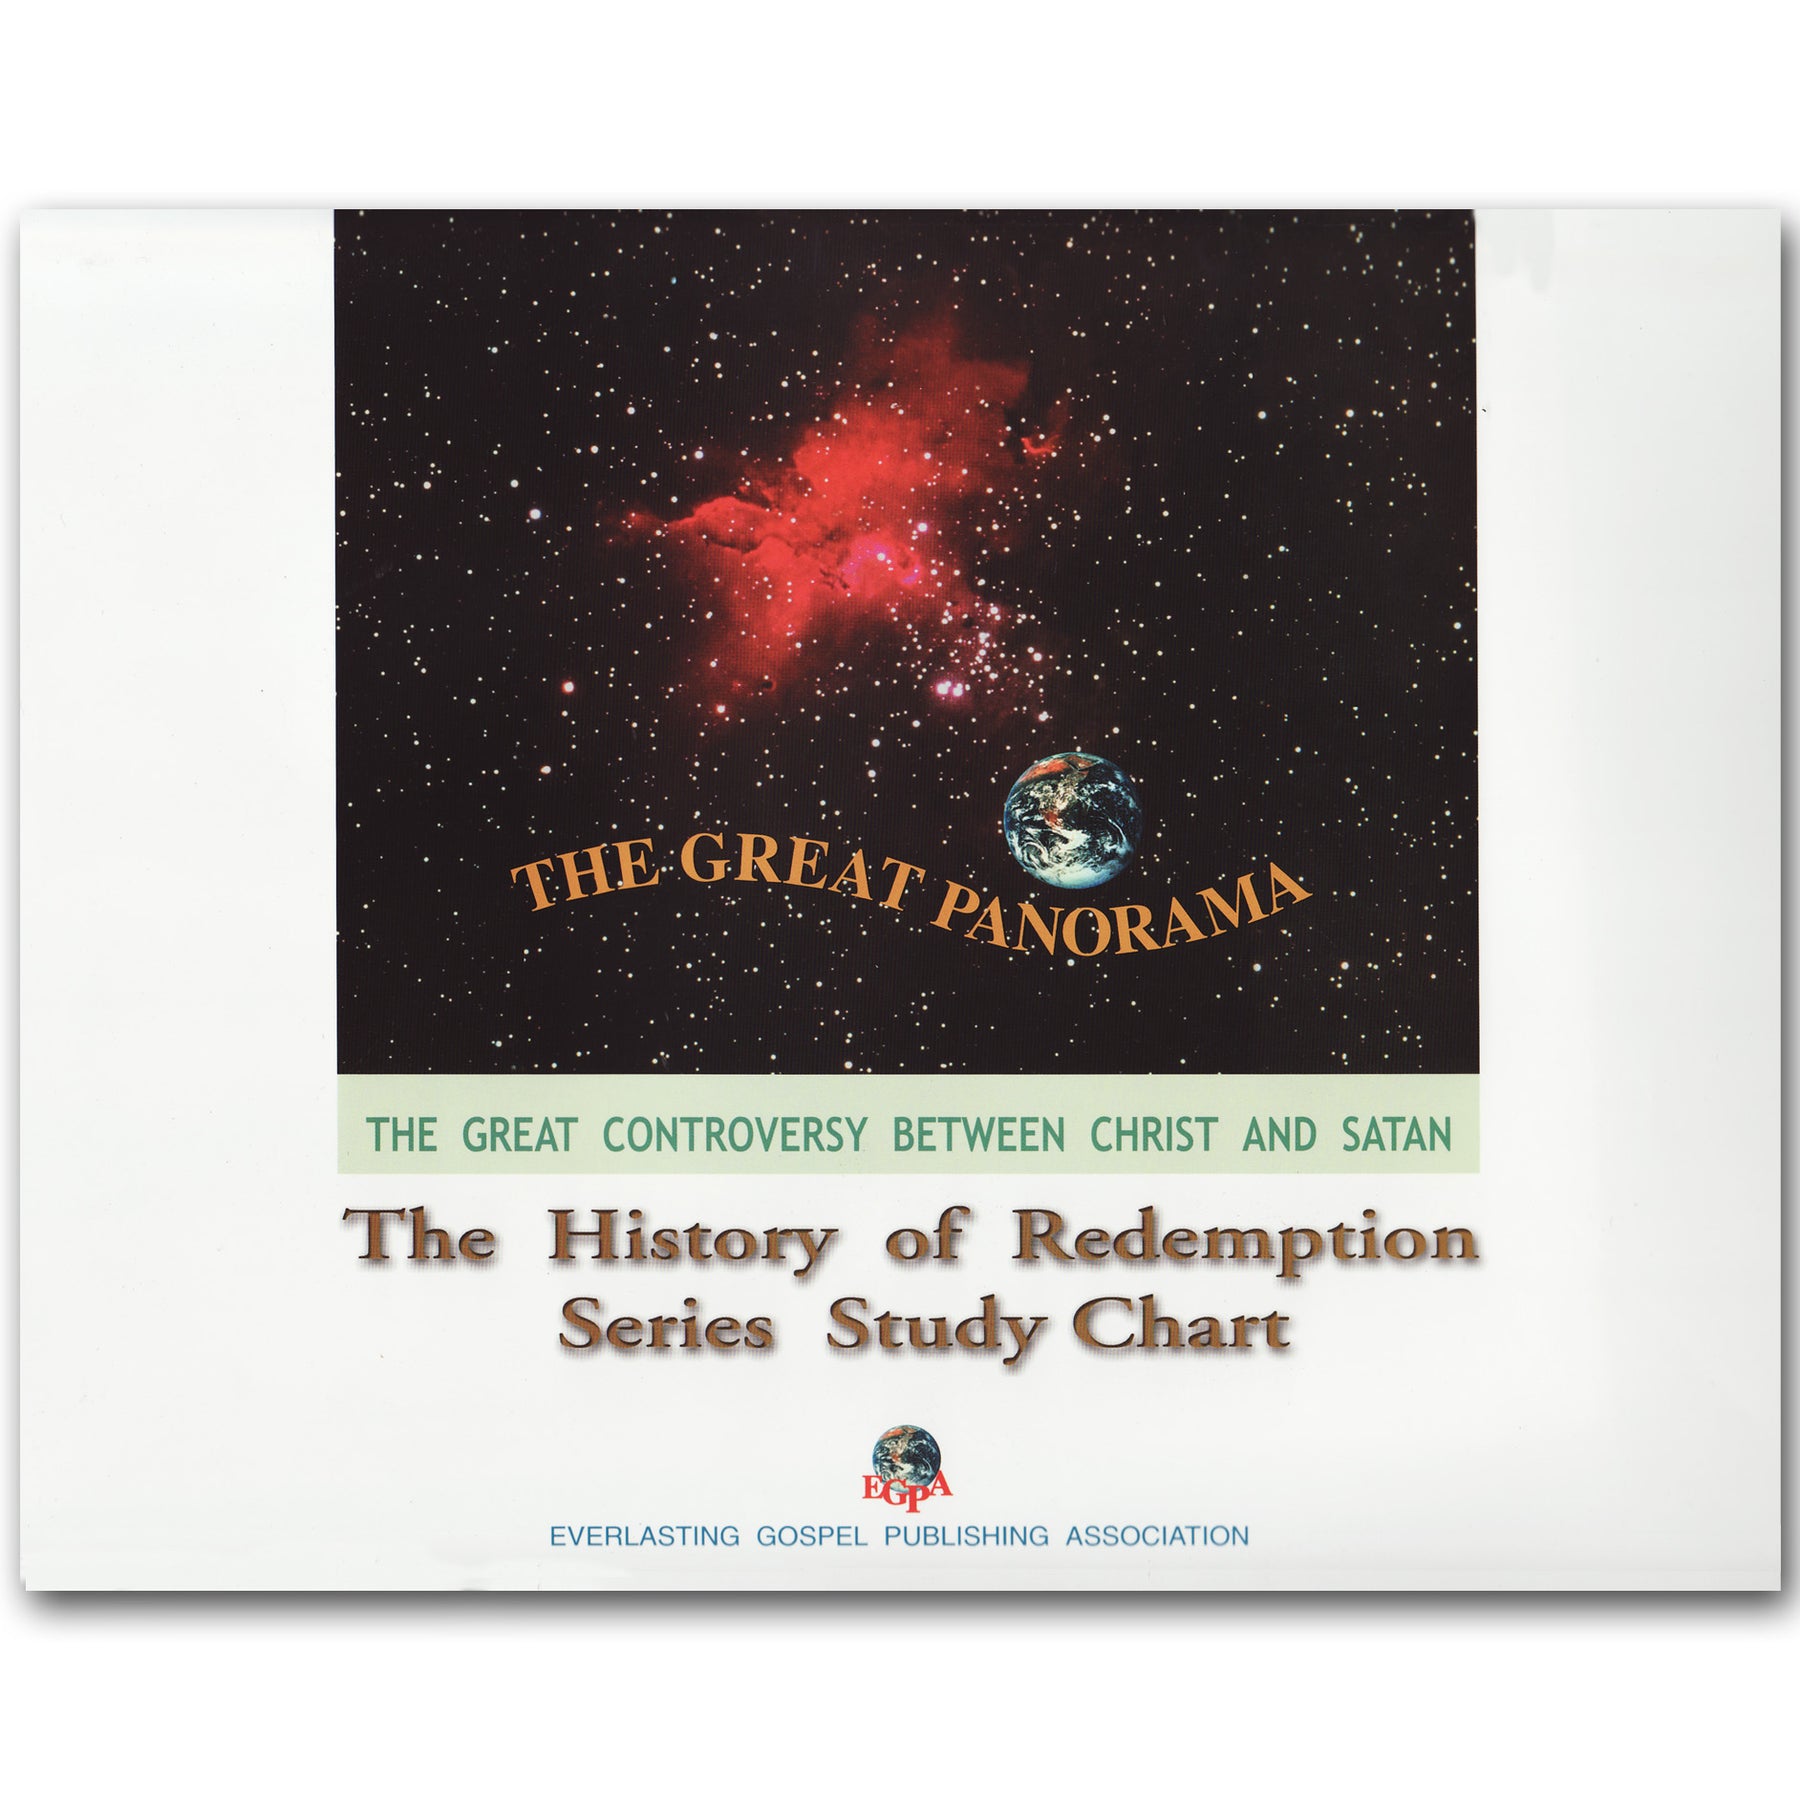 History of Redemption Study Chart by Everlasting Gospel Publishing